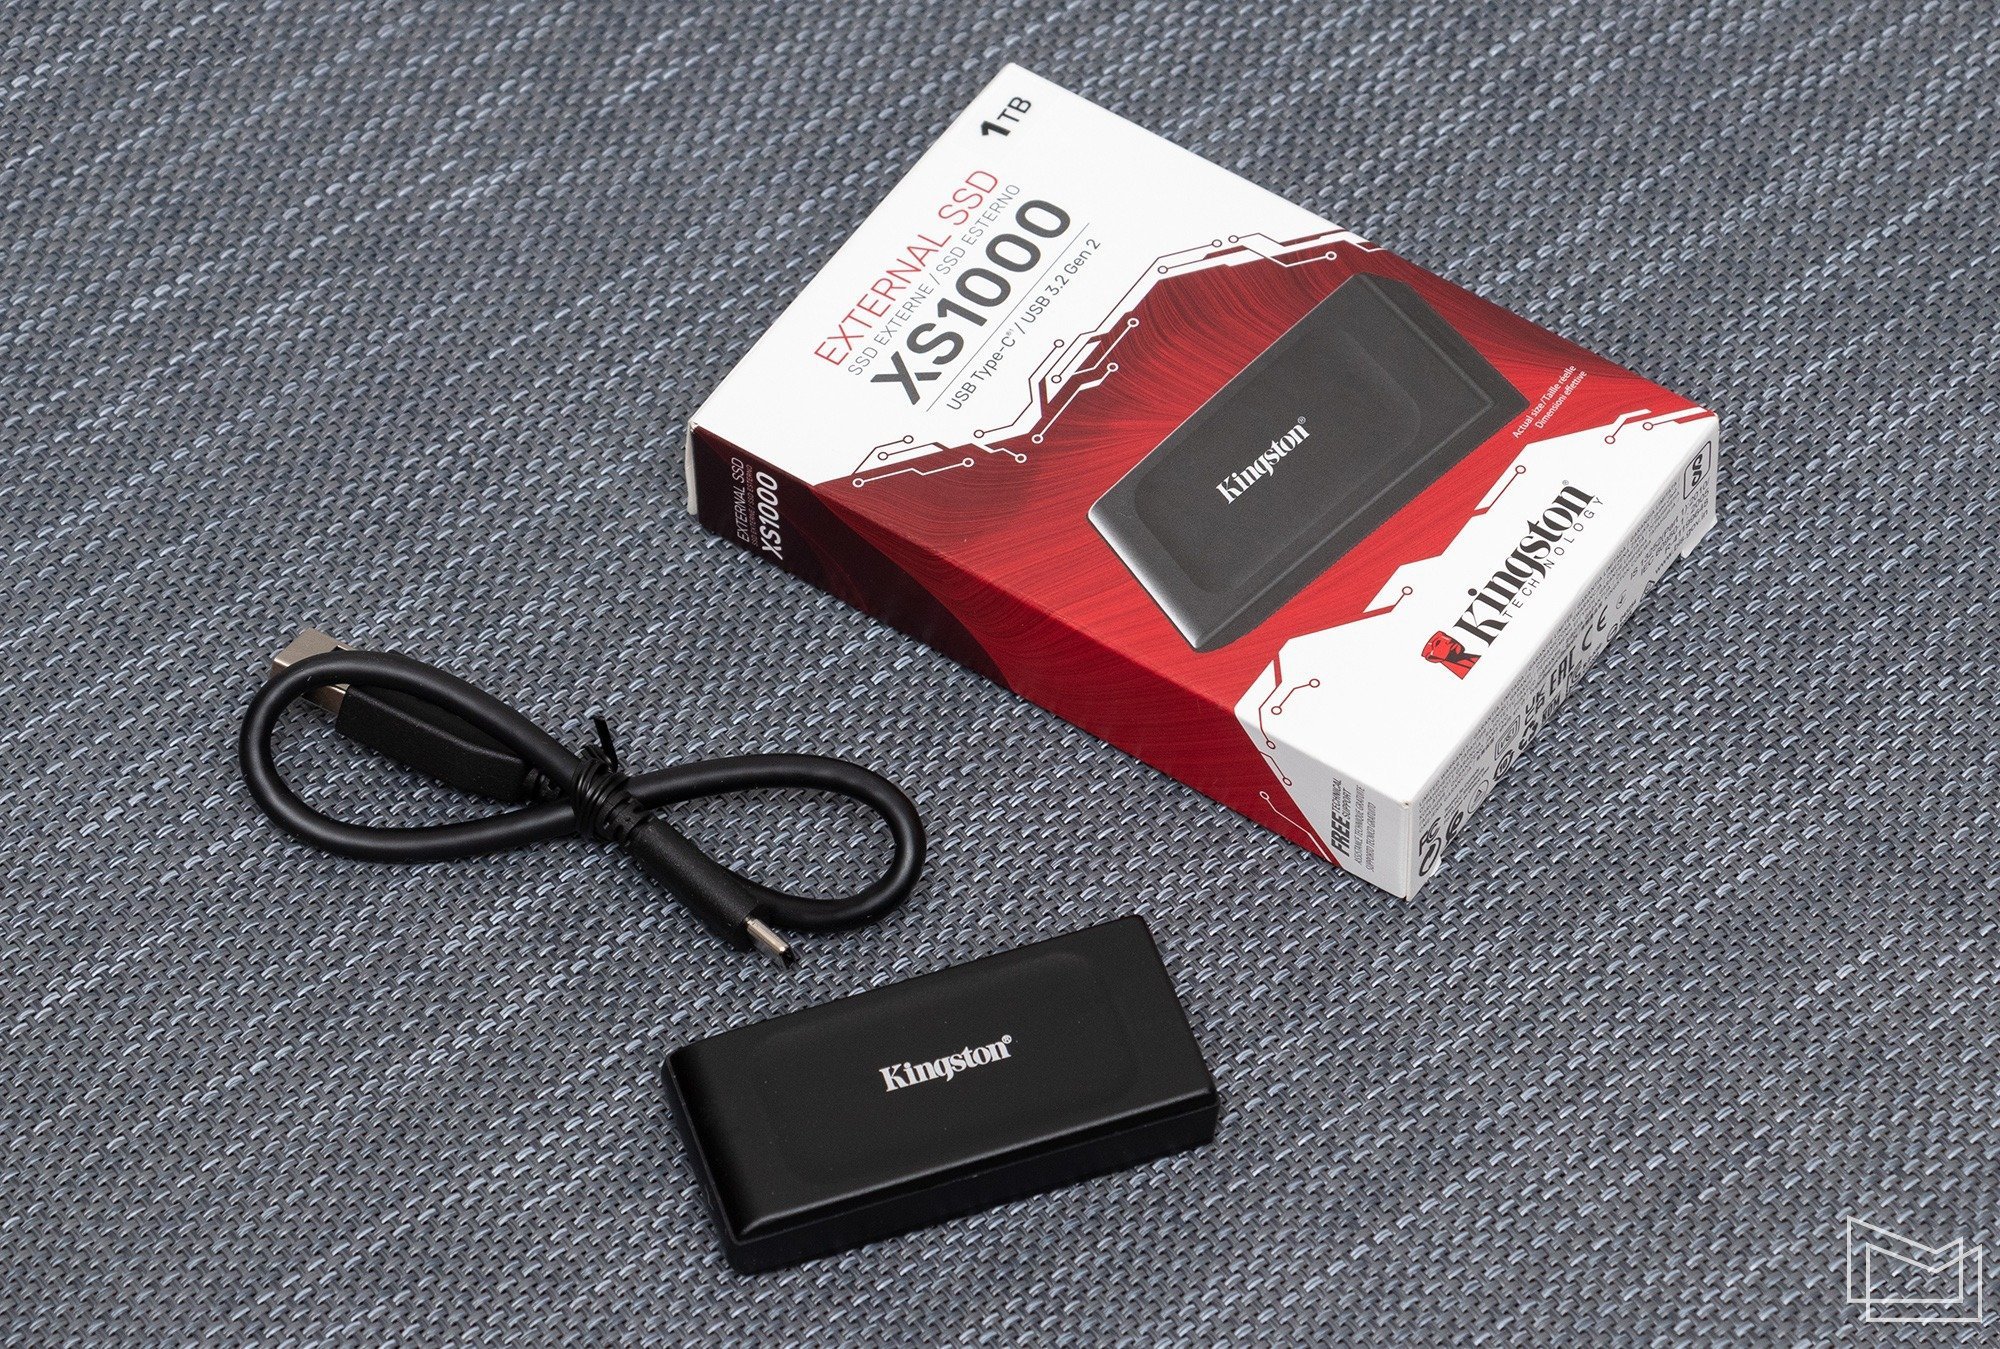 Kingston XS2000 review: Small in size, big in performance￼